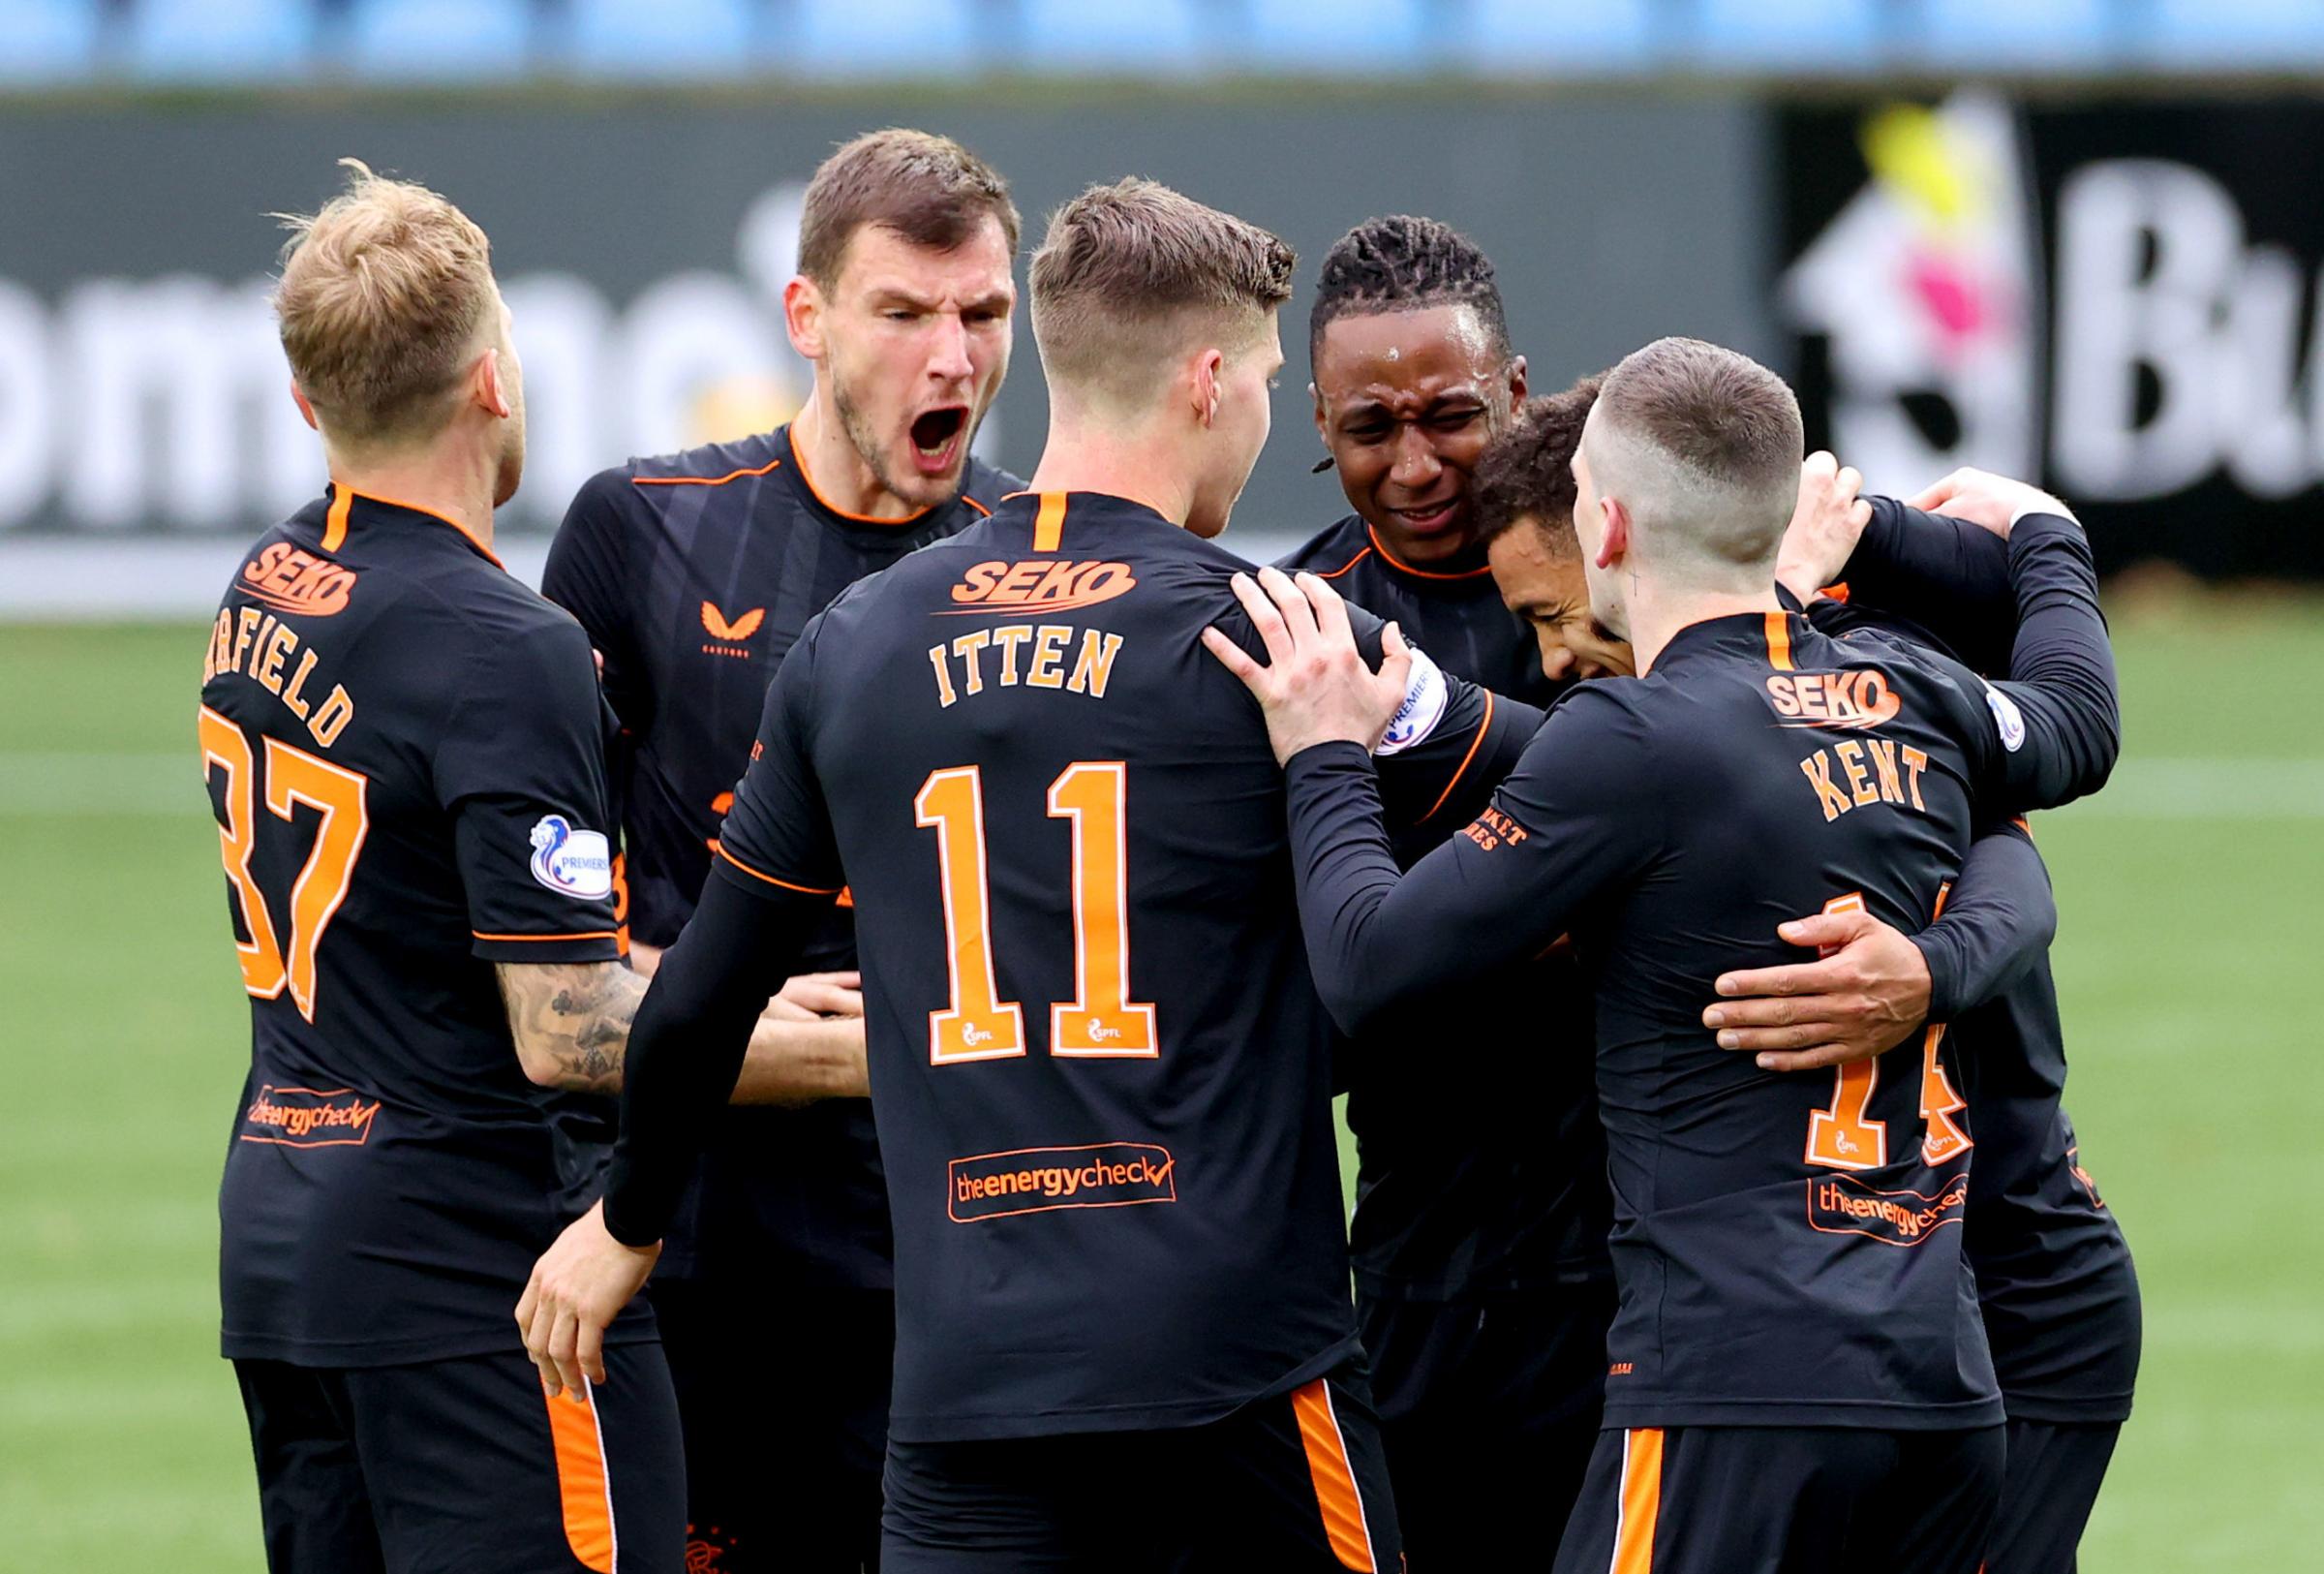 Rangers James Tavernier celebrates with his teammates after scoring his sides first goal of the game from the penalty spot during the Scottish Premiership match at Rugby Park